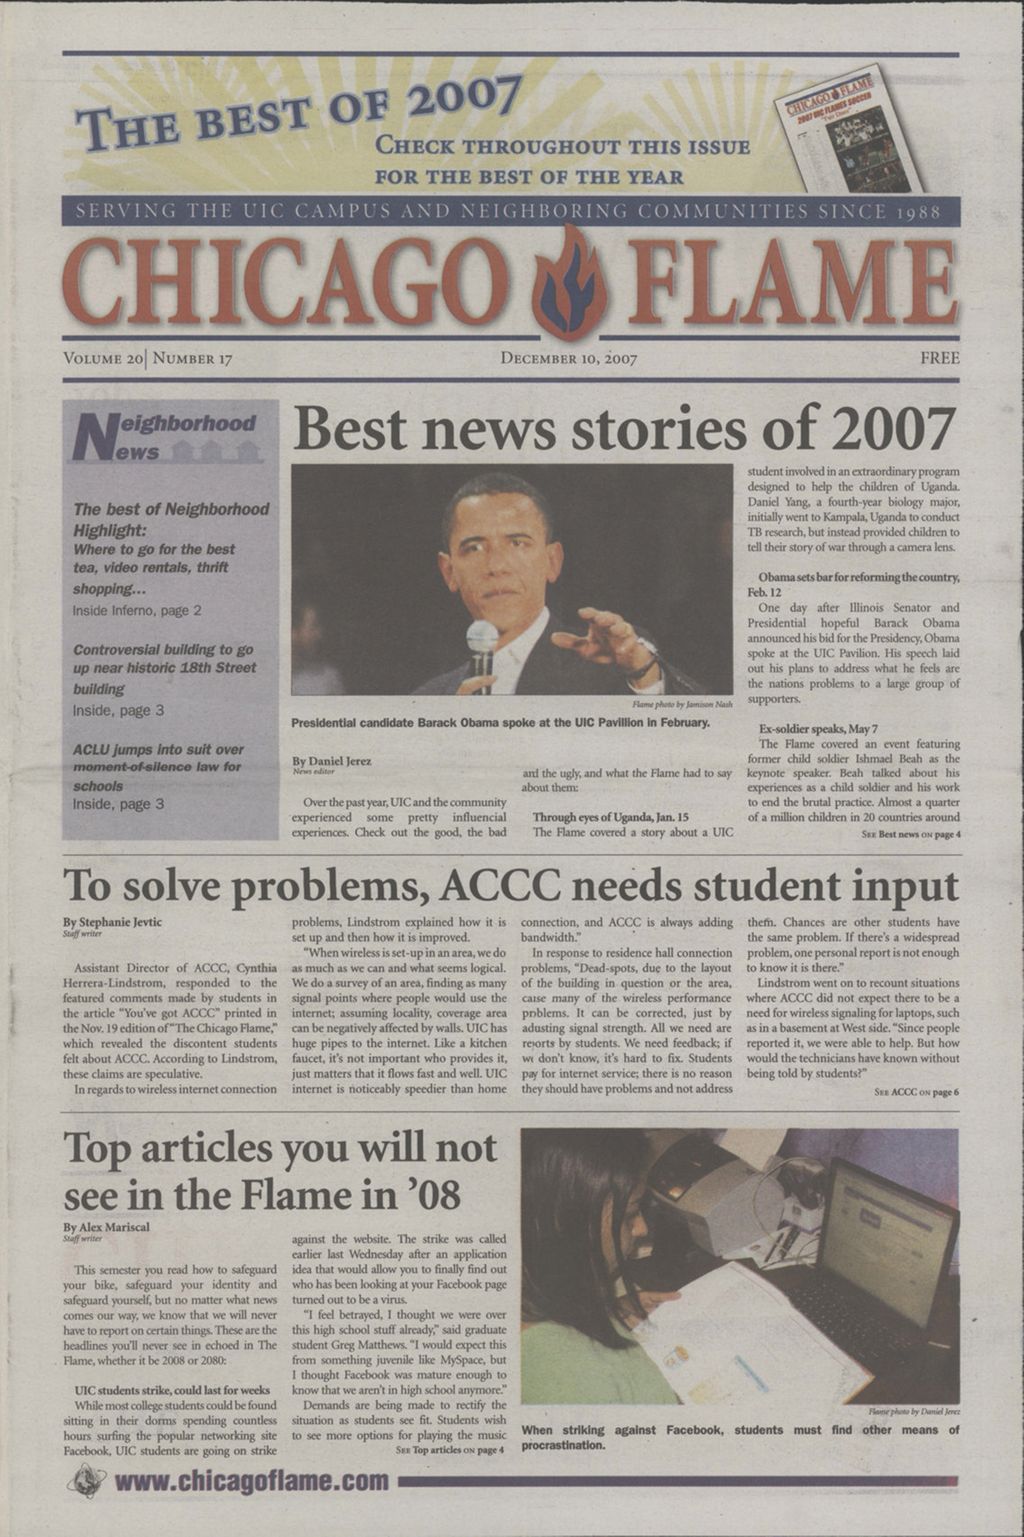 Miniature of Chicago Flame (December 10, 2007)